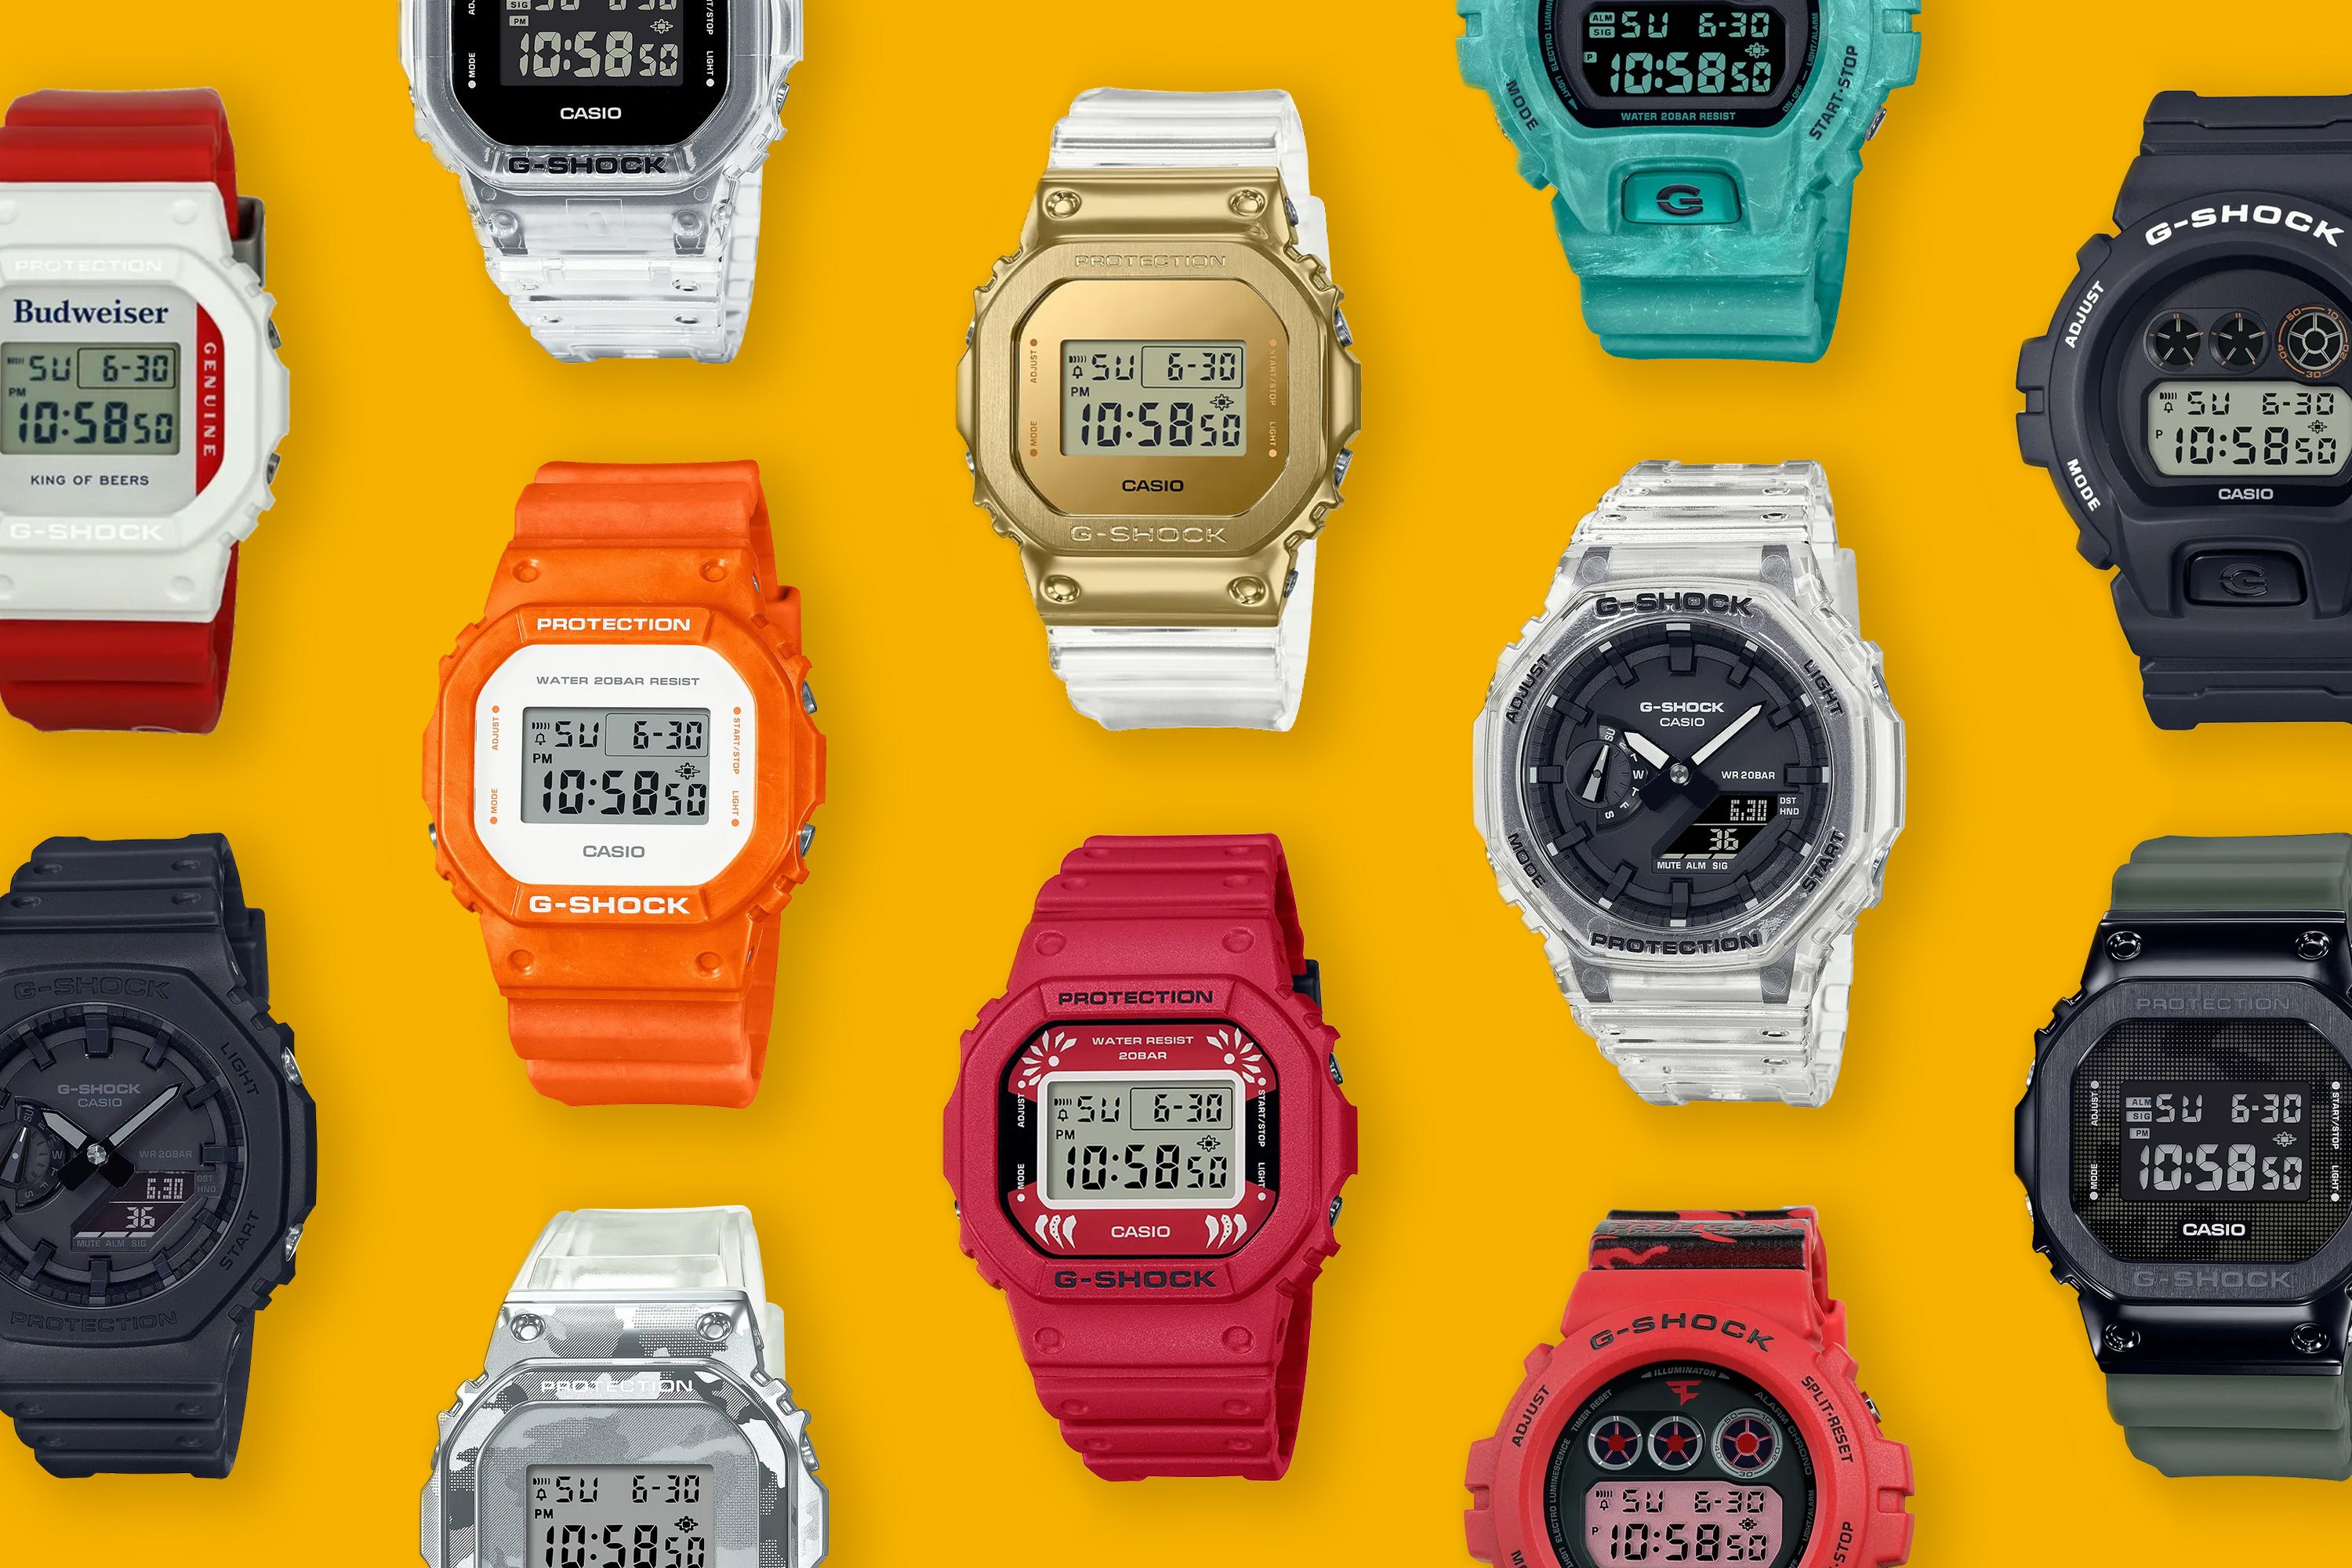 Dear G-Shock, I Want to Customize My Watch Online